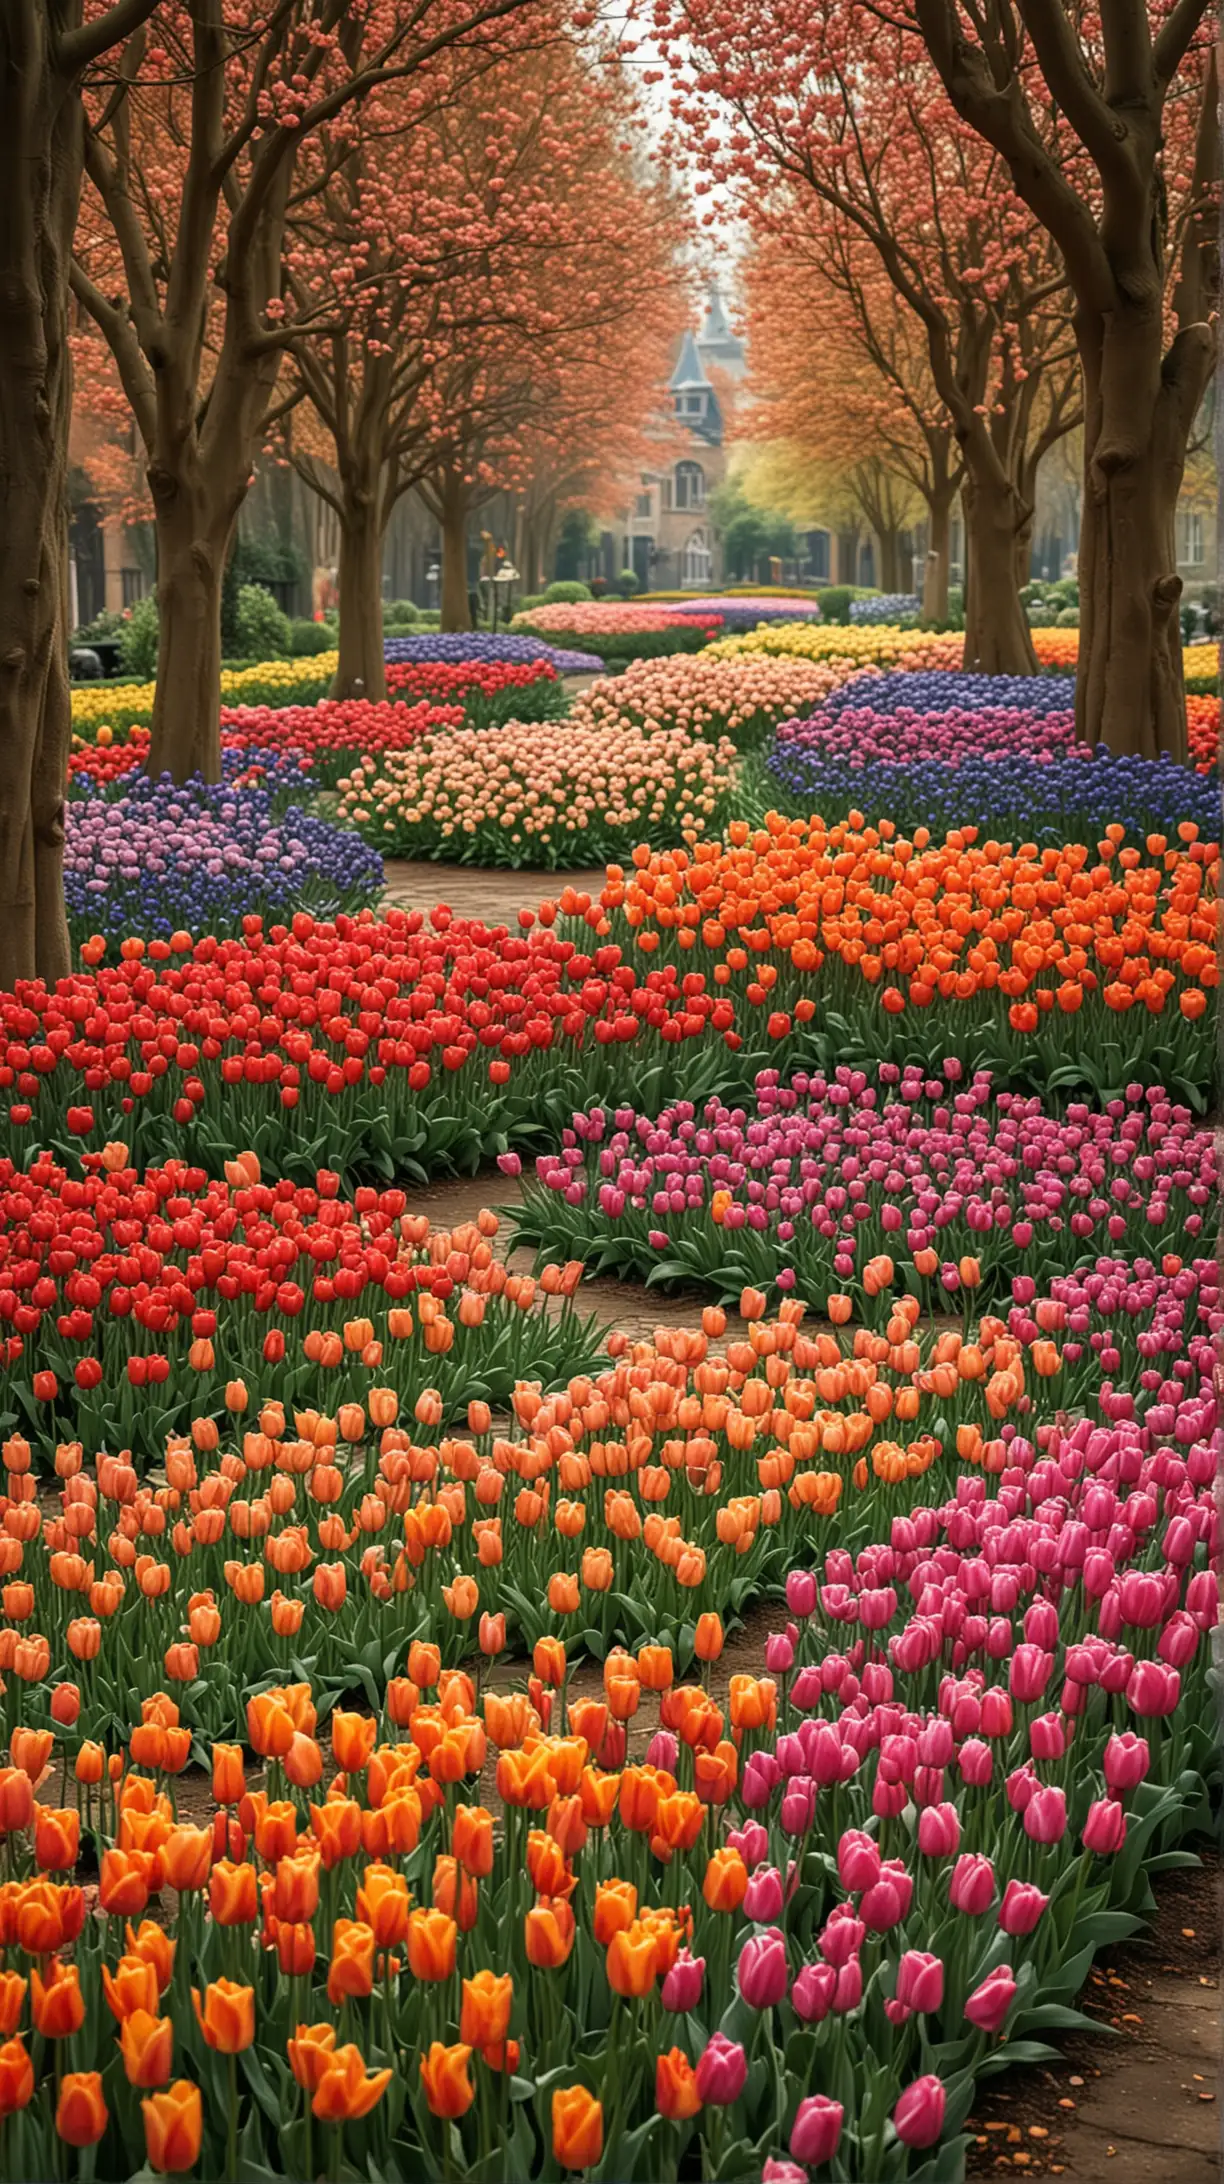 Make stunning place with loads of tulips flowers, make this place magical and real, gorgeous colours and 4k quality picture